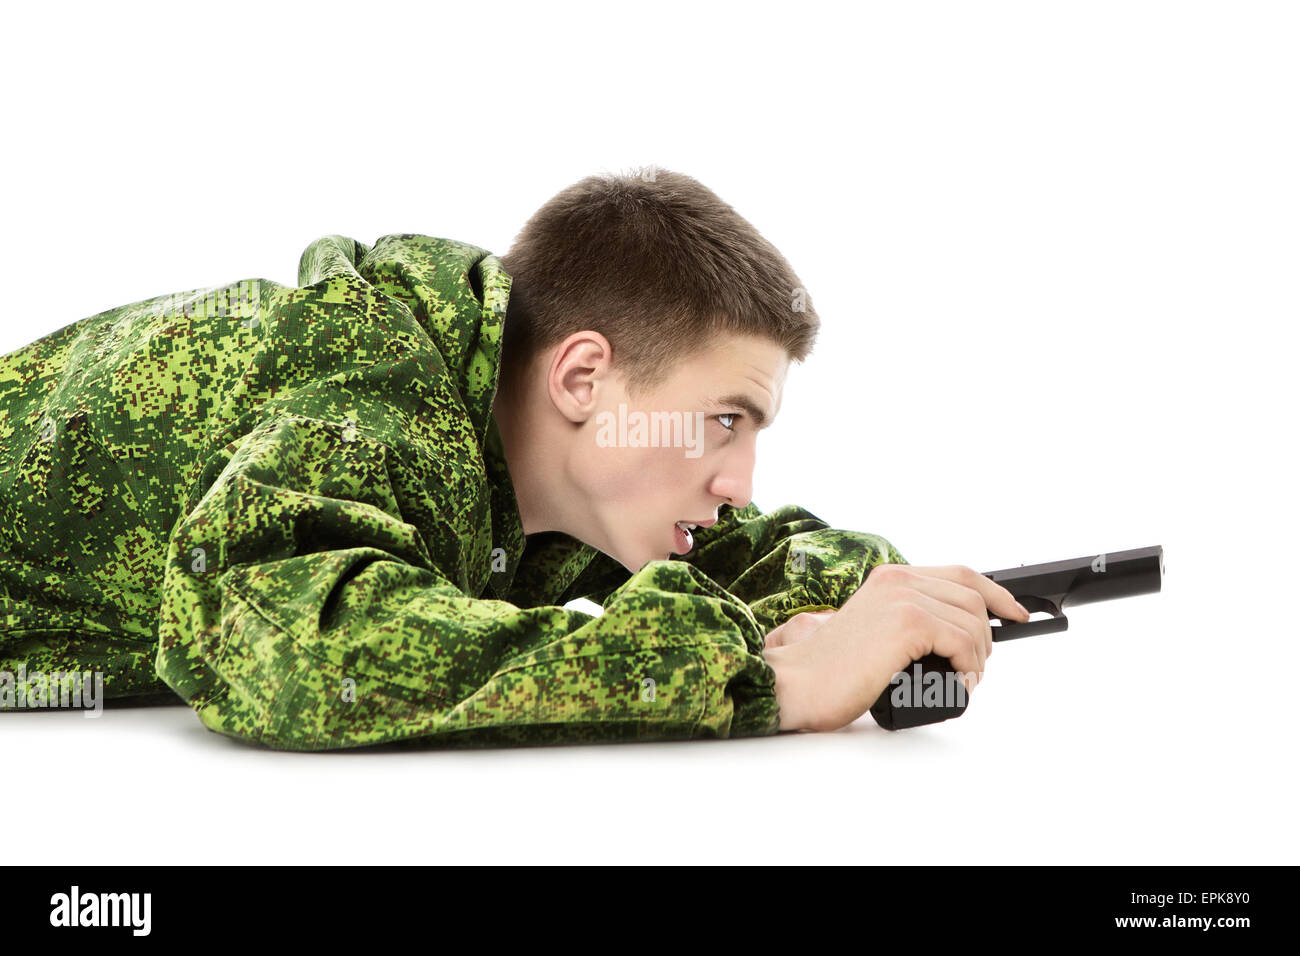 young military man with gun, isolated on white Stock Photo